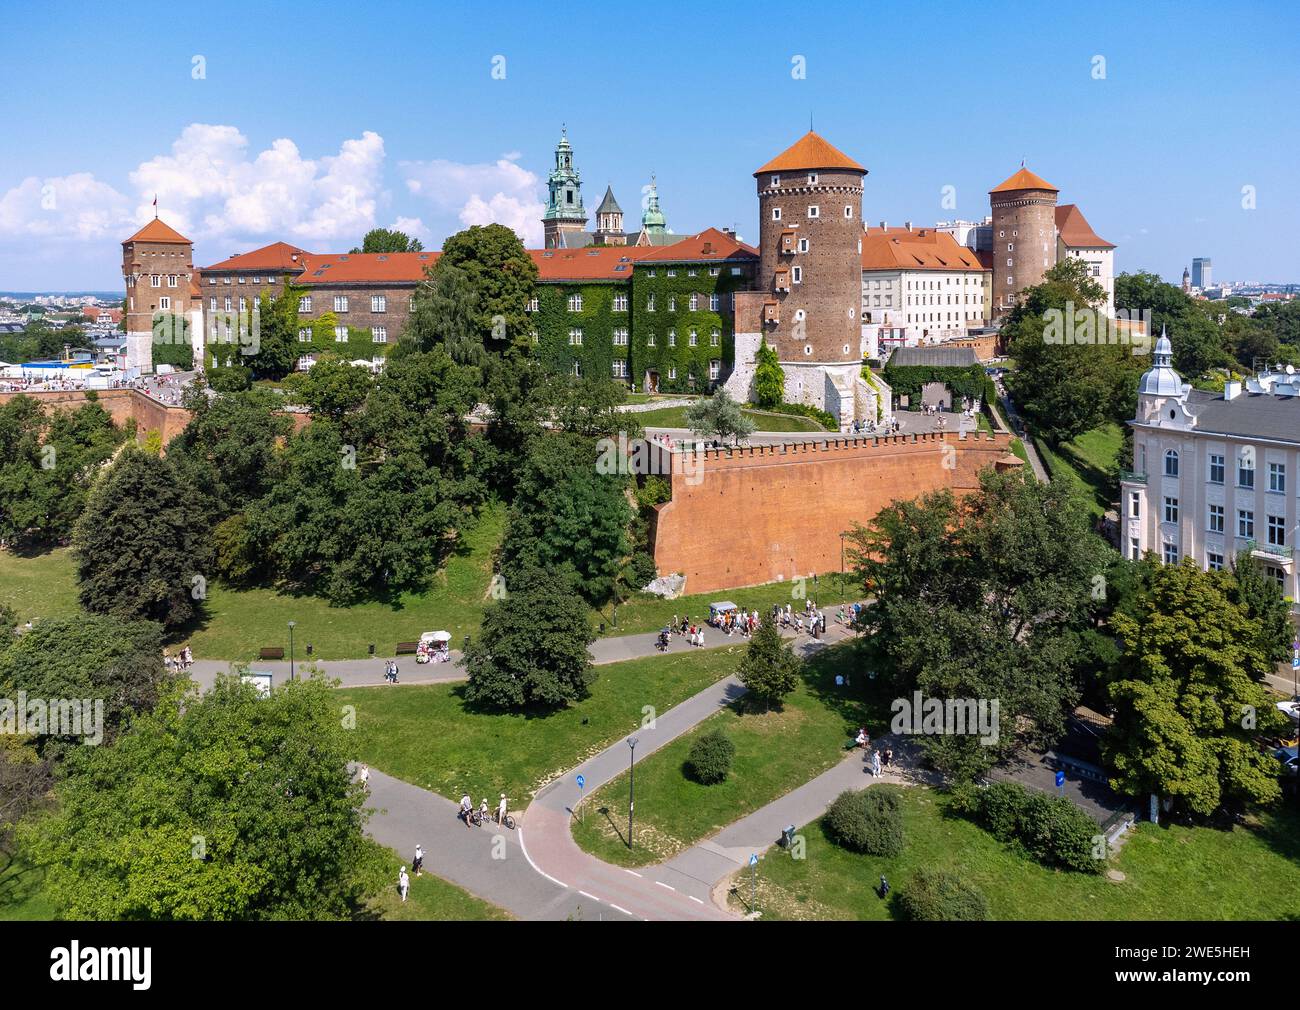 Wawel Plateau (Wzgórze Wawelskie) with defensive towers and bastions in the old town of Kraków in Poland Stock Photo